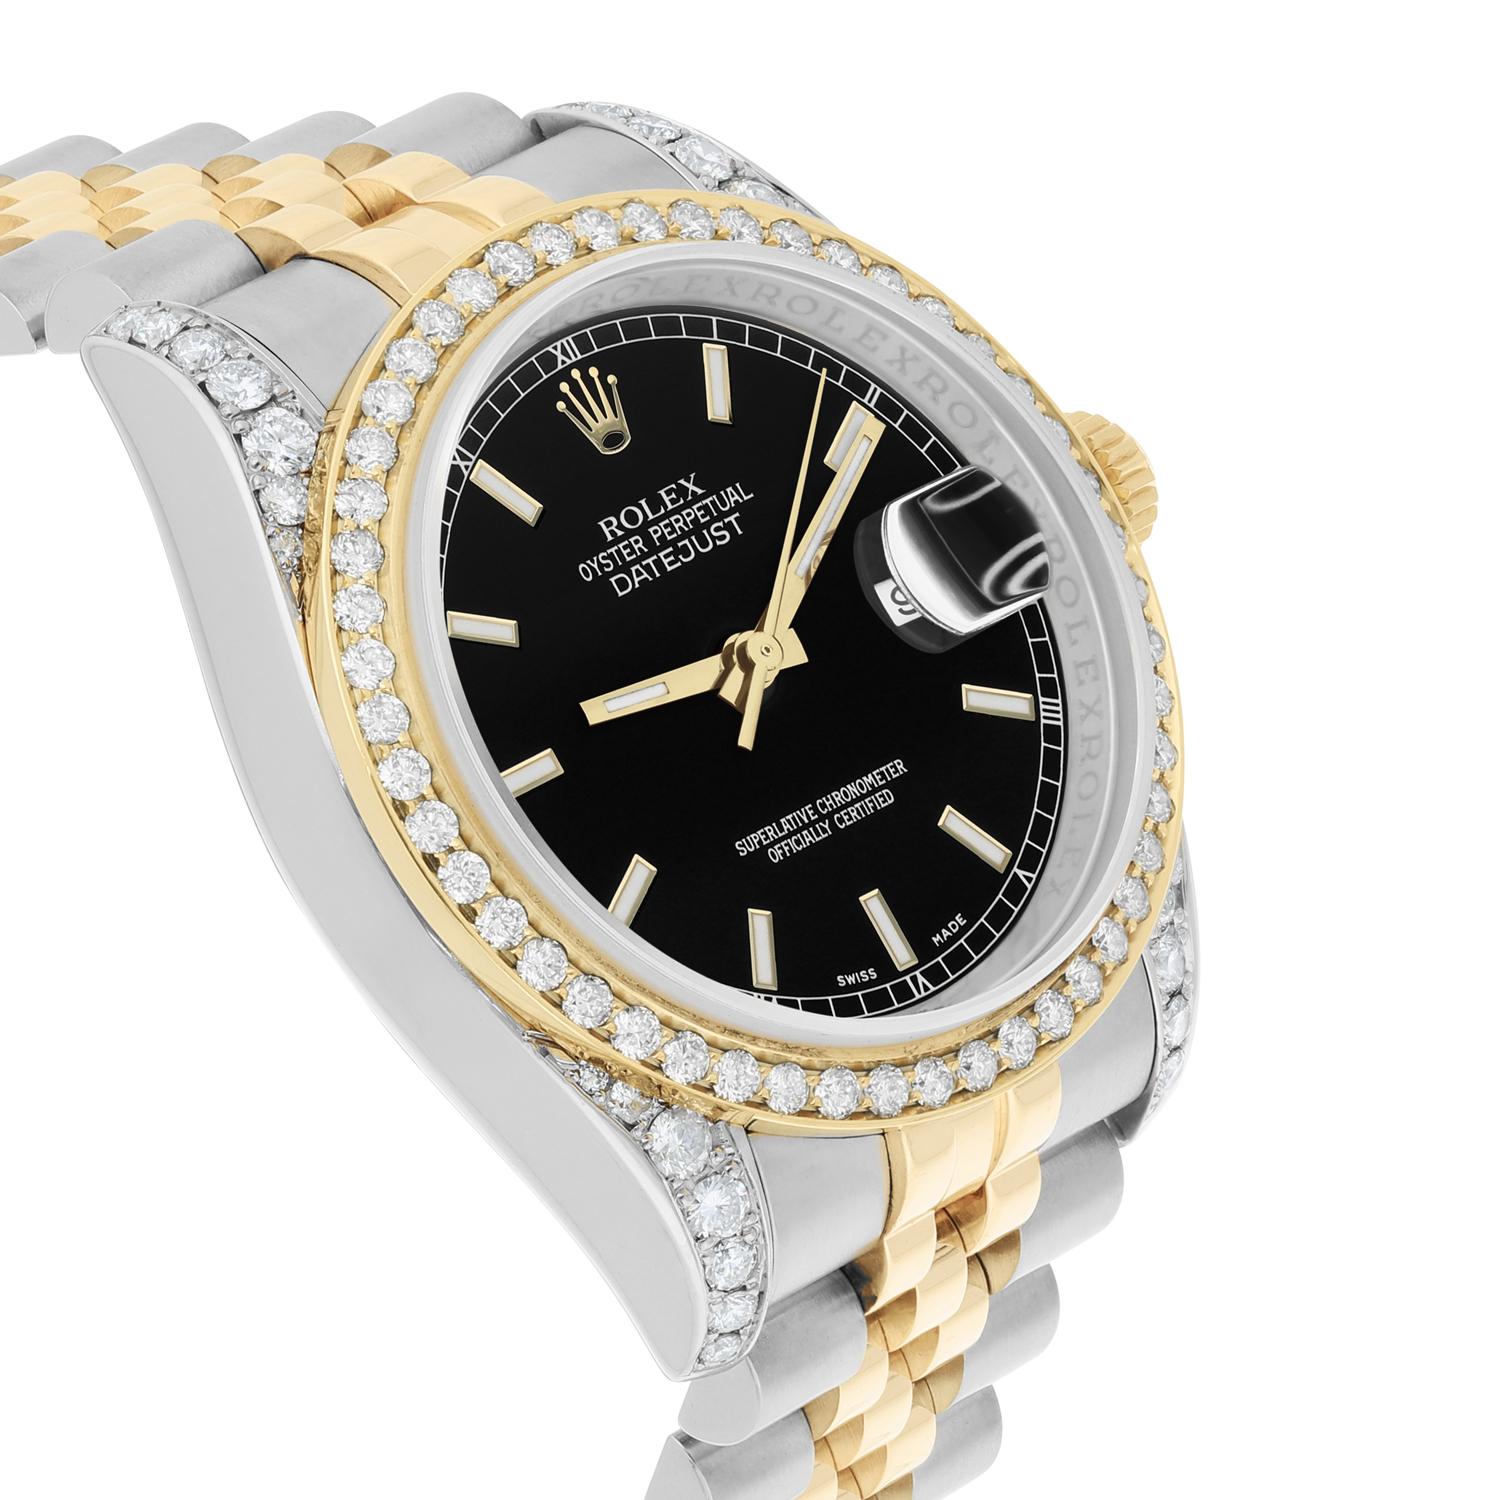 Rolex Datejust 36 Gold/Steel 116233 Black Index Dial Jubilee Band Diamond Watch For Sale 1